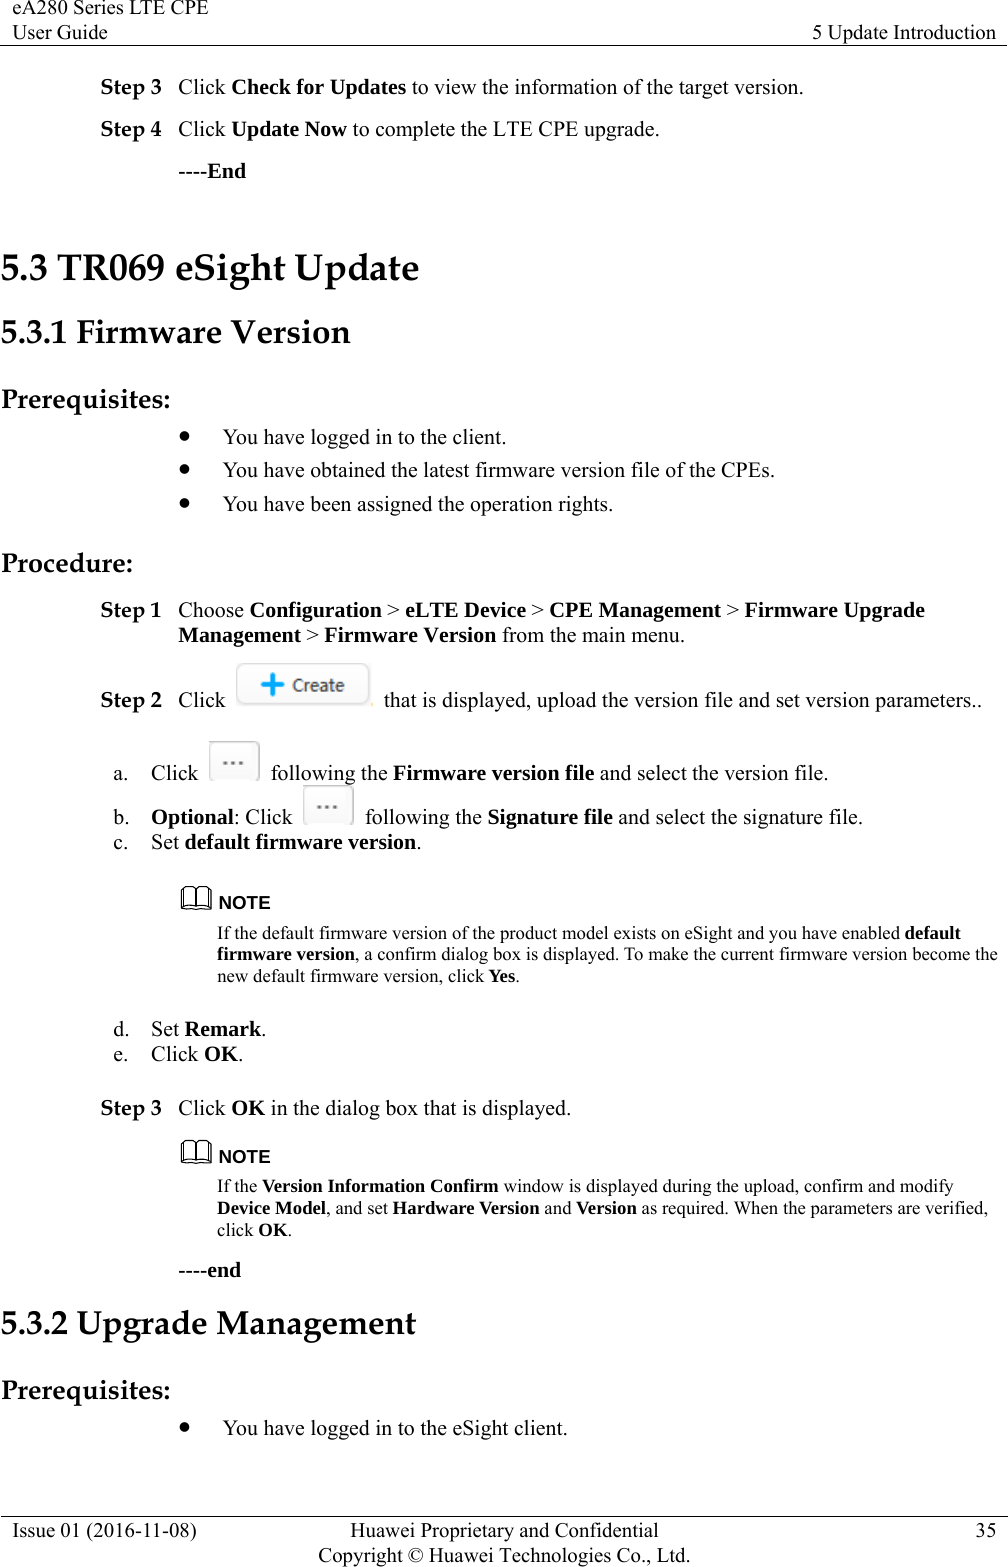 eA280 Series LTE CPE User Guide  5 Update Introduction Issue 01 (2016-11-08)  Huawei Proprietary and Confidential         Copyright © Huawei Technologies Co., Ltd.35 Step 3 Click Check for Updates to view the information of the target version.   Step 4 Click Update Now to complete the LTE CPE upgrade. ----End 5.3 TR069 eSight Update 5.3.1 Firmware Version Prerequisites:  You have logged in to the client.  You have obtained the latest firmware version file of the CPEs.  You have been assigned the operation rights. Procedure: Step 1 Choose Configuration &gt; eLTE Device &gt; CPE Management &gt; Firmware Upgrade Management &gt; Firmware Version from the main menu. Step 2 Click    that is displayed, upload the version file and set version parameters.. a. Click   following the Firmware version file and select the version file. b. Optional: Click   following the Signature file and select the signature file. c. Set default firmware version. NOTE If the default firmware version of the product model exists on eSight and you have enabled default firmware version, a confirm dialog box is displayed. To make the current firmware version become the new default firmware version, click Yes. d. Set Remark. e. Click OK. Step 3 Click OK in the dialog box that is displayed. NOTE If the Version Information Confirm window is displayed during the upload, confirm and modify Device Model, and set Hardware Version and Version as required. When the parameters are verified, click OK. ----end 5.3.2 Upgrade Management Prerequisites:  You have logged in to the eSight client. 